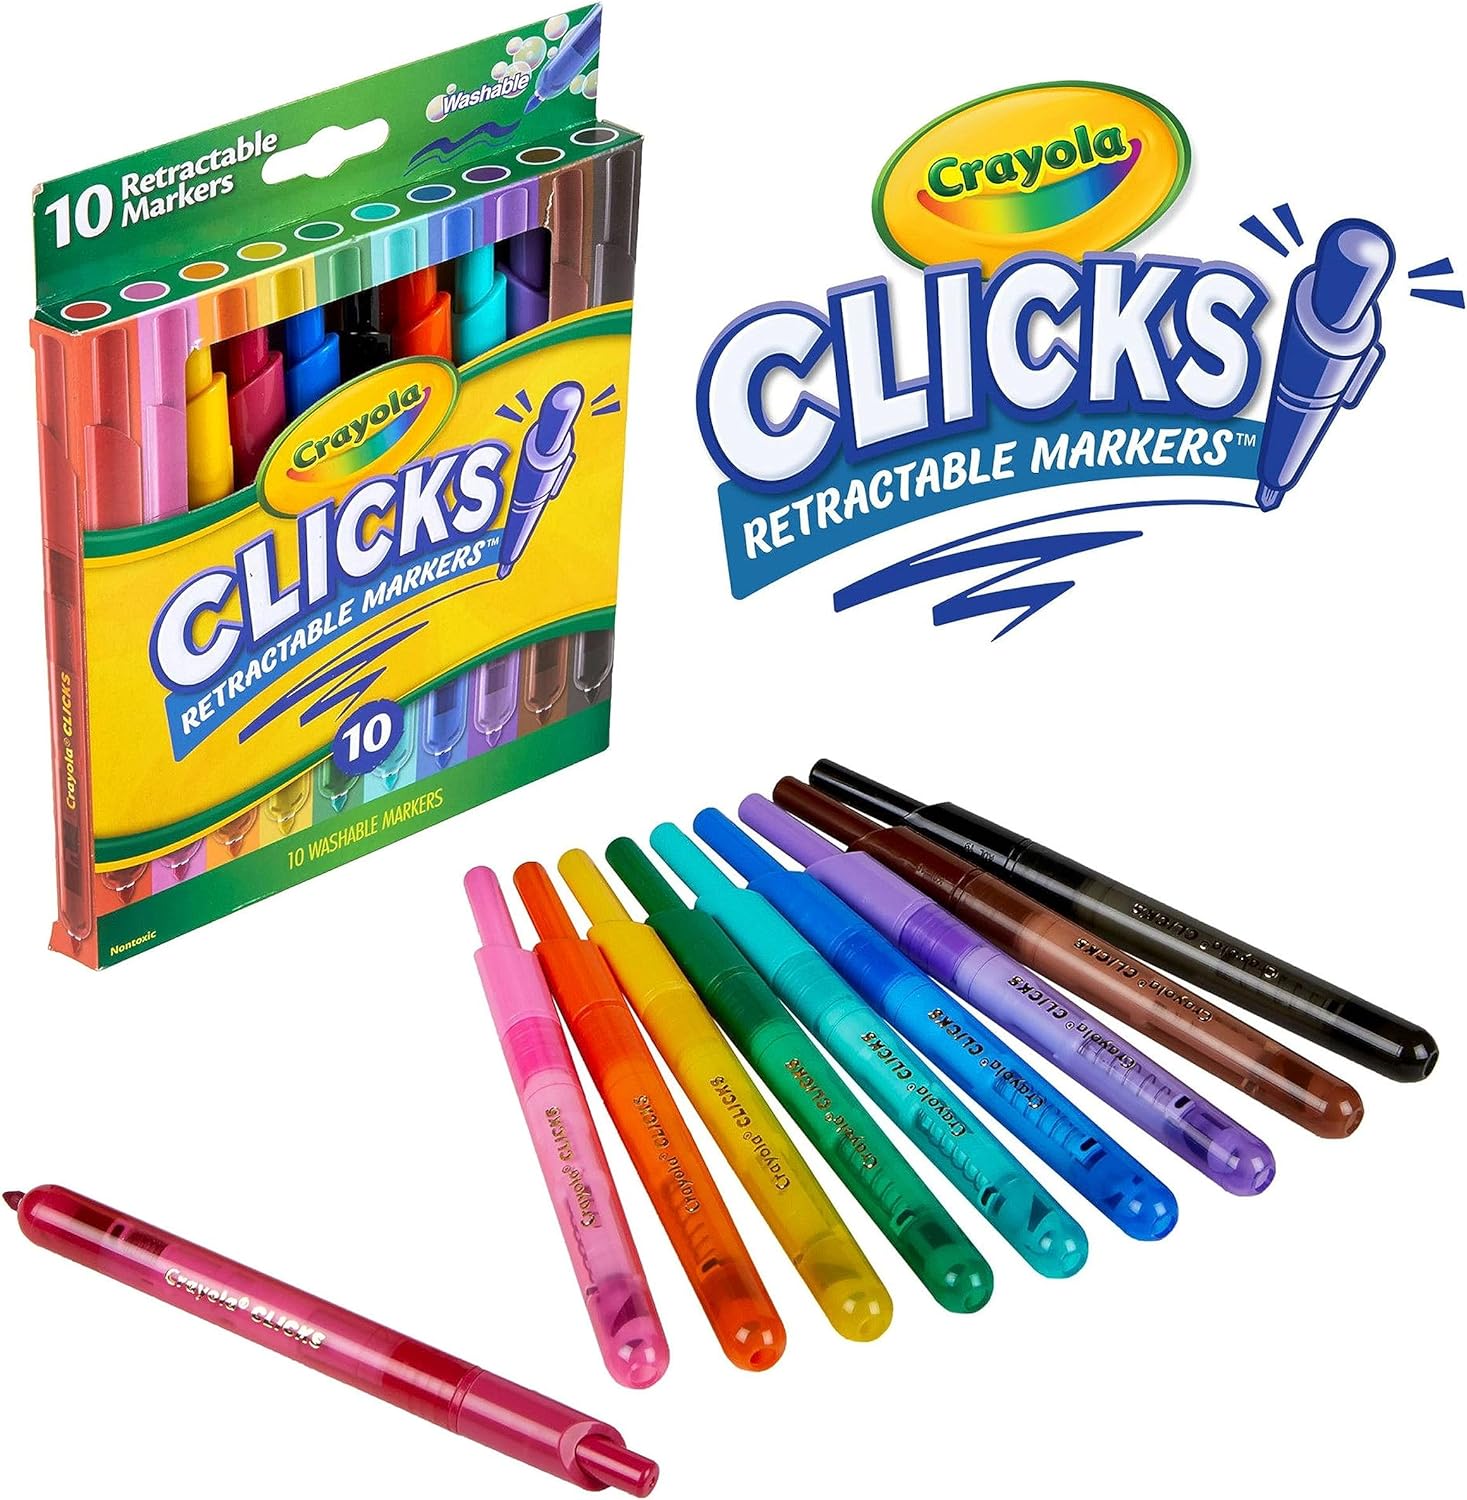 Crayola Fabric Markers Fine Line 10 Pack - Kidsplay Crafts - Art and Craft  Supplies